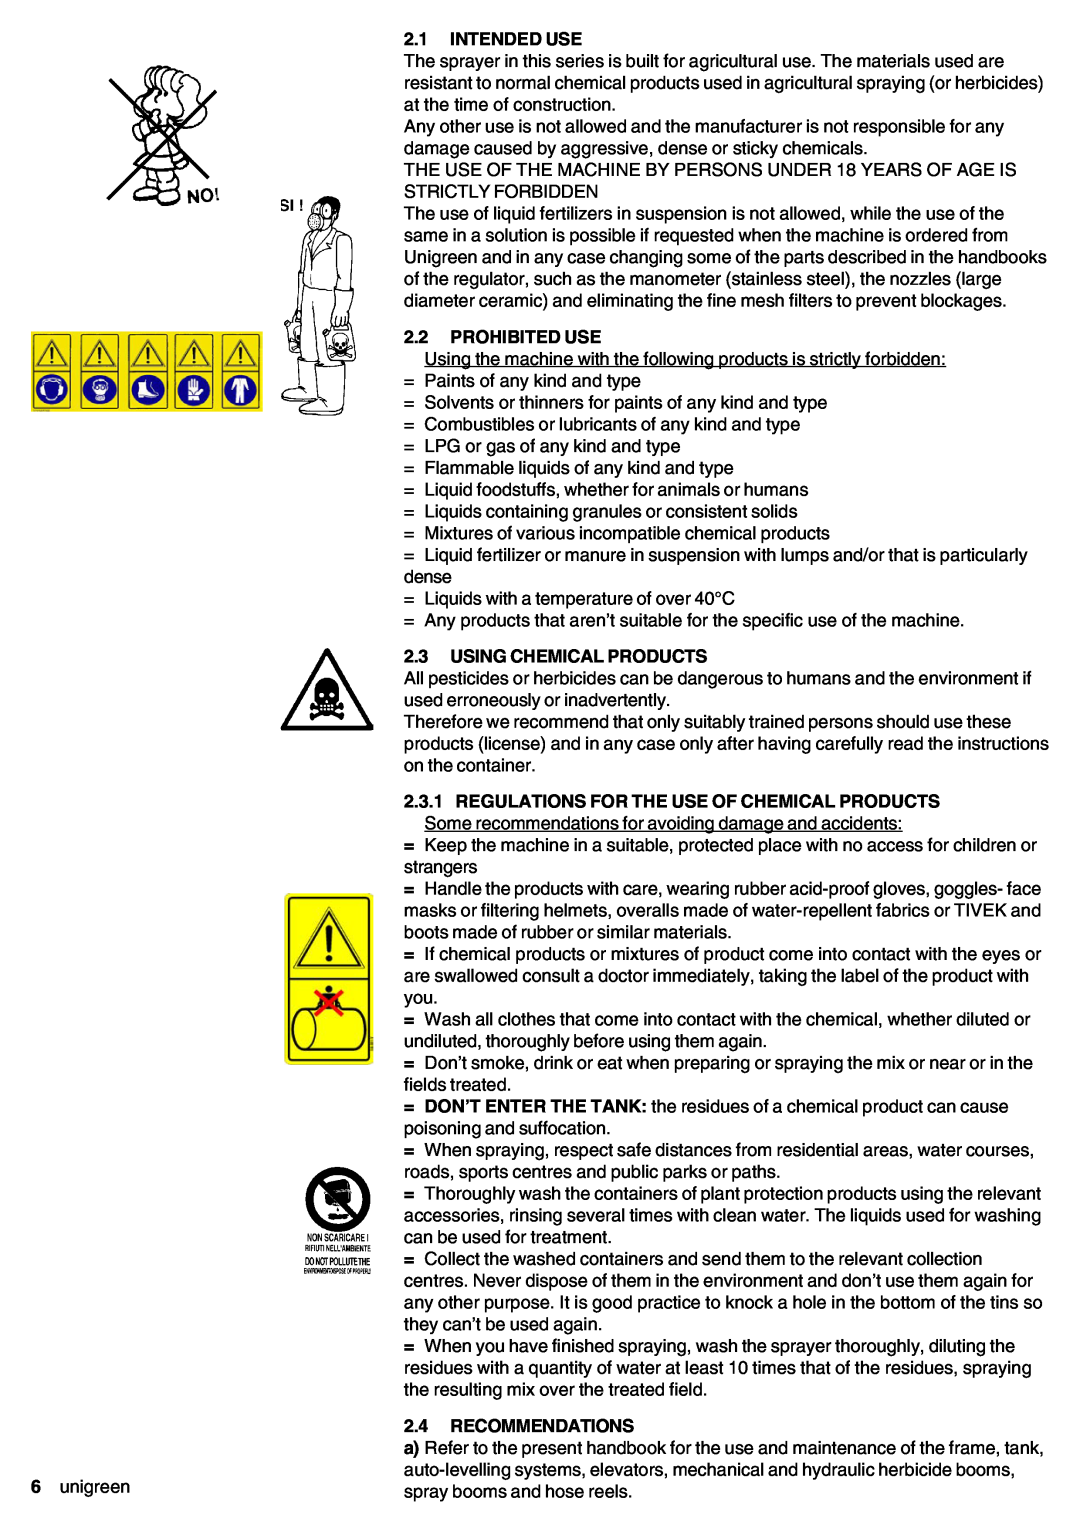 Unigreen 11, 22, 16, 32 manual 2.1INTENDED USE, 2.2PROHIBITED USE, 2.3USING CHEMICAL PRODUCTS, Recommendations 